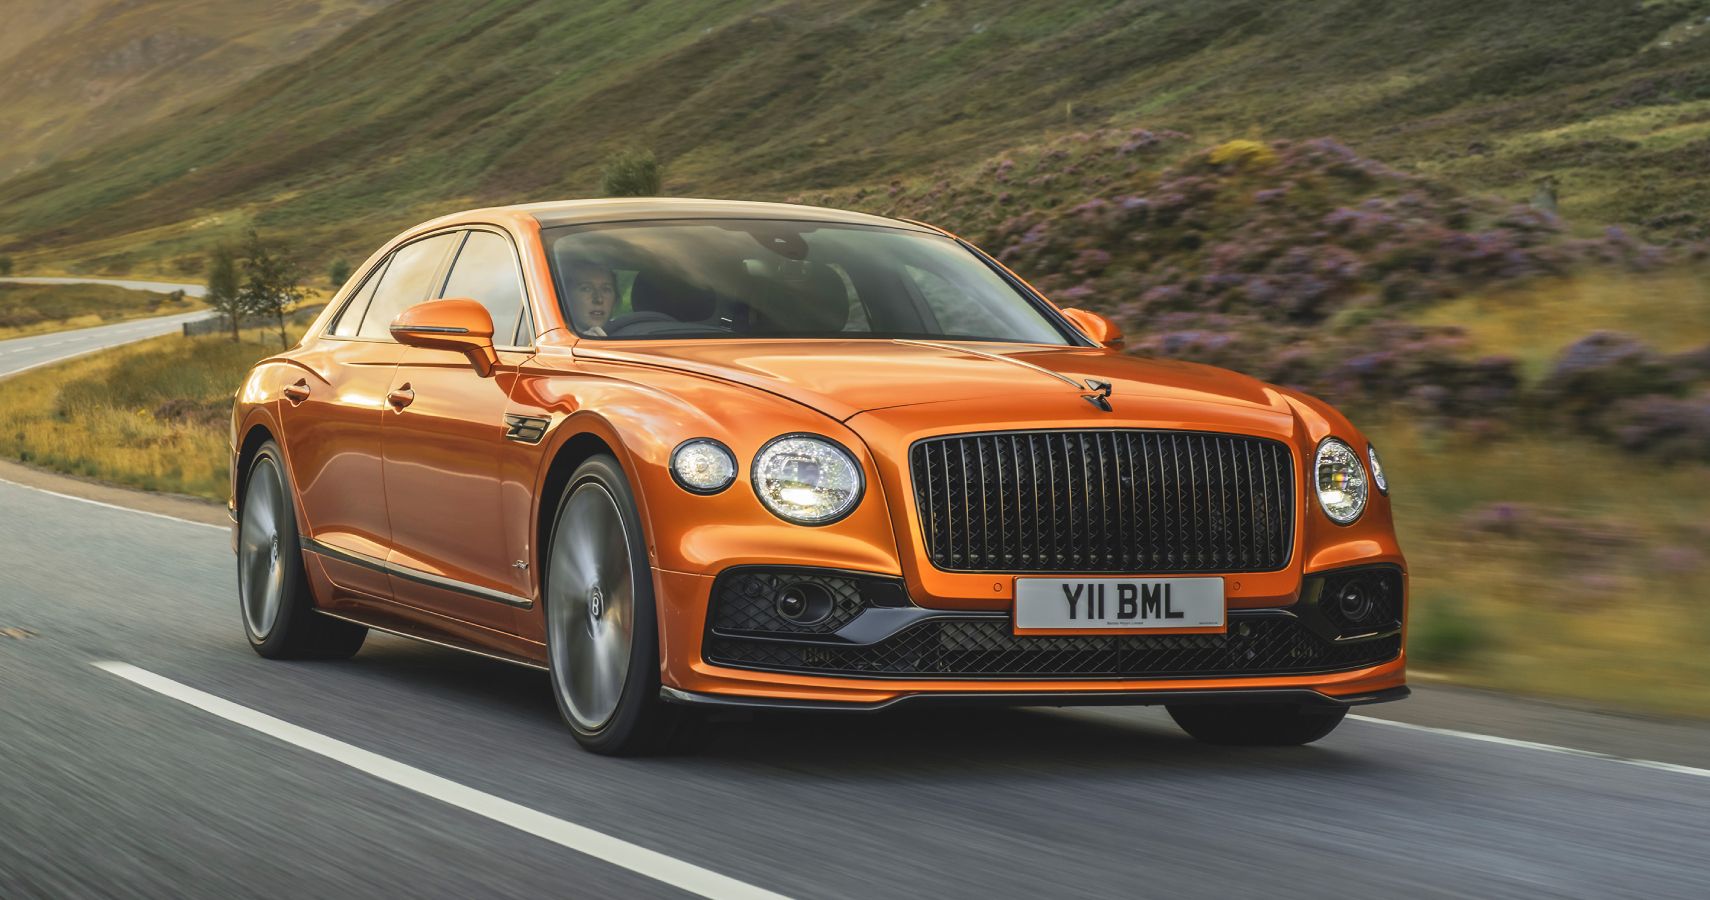 Orange Bentley Flying Spur Speed driven on the road